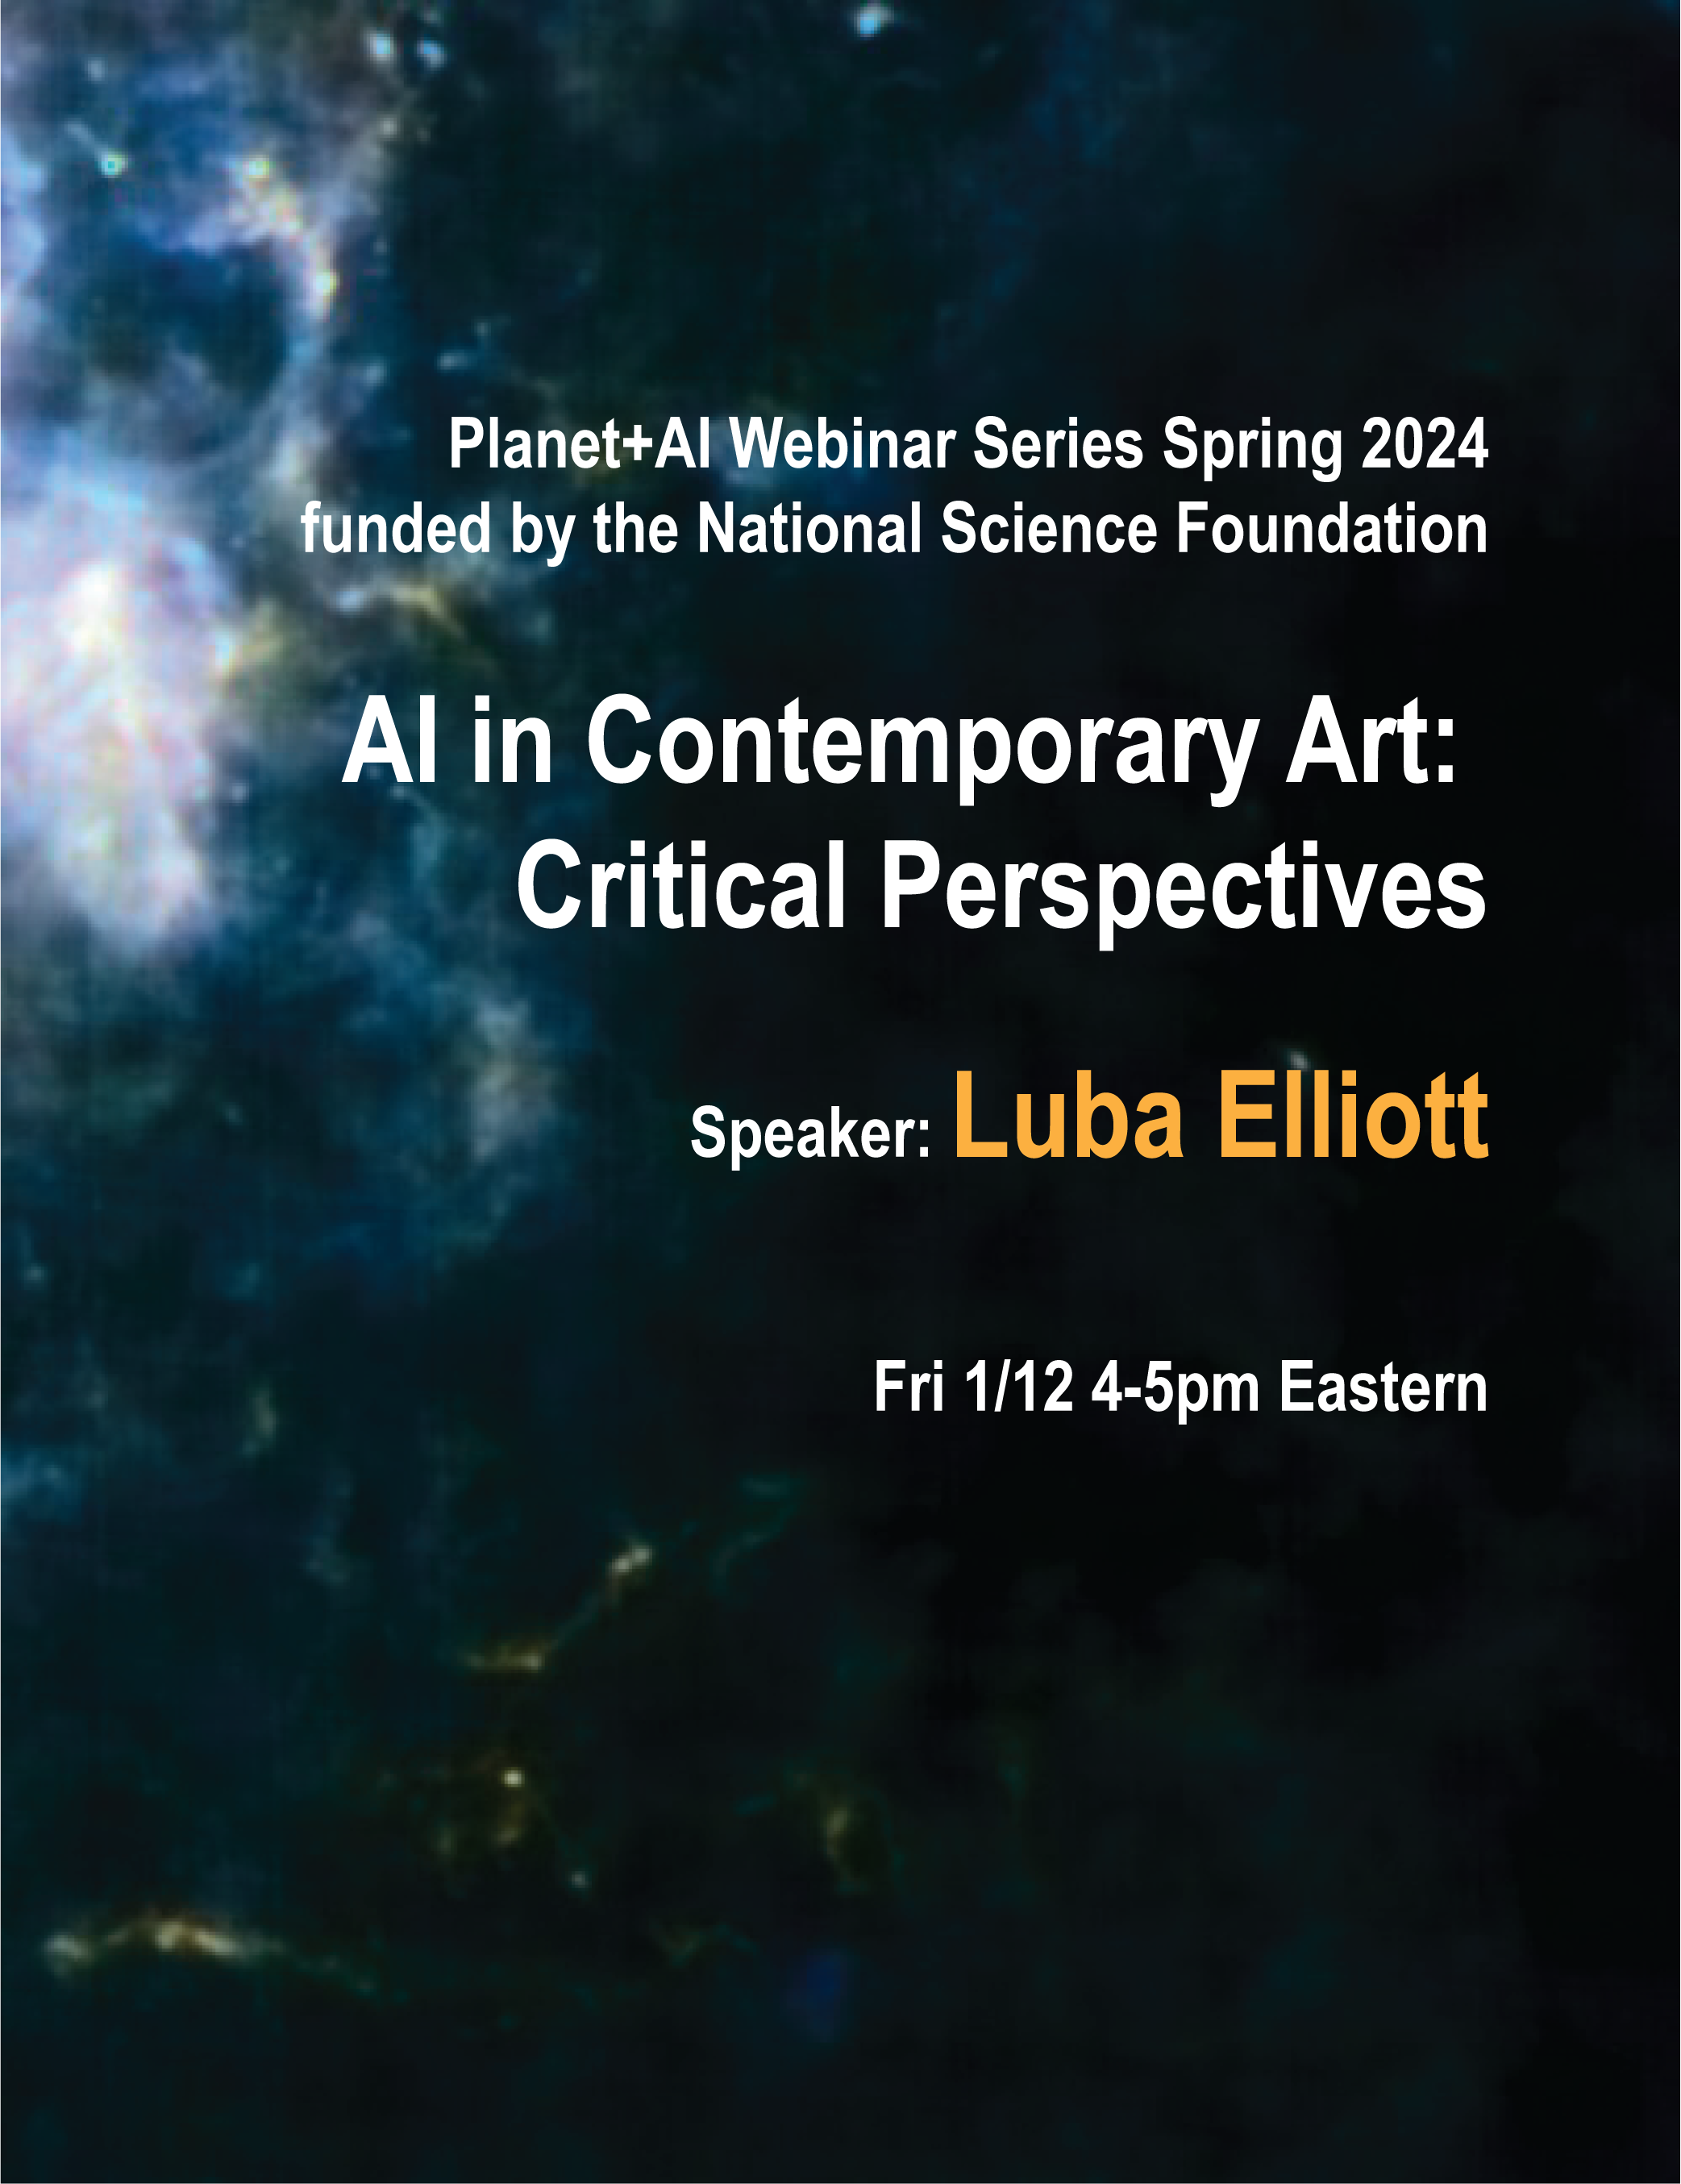 Webinar on Jan 12: AI in Contemporary Art: Critical Perspectives